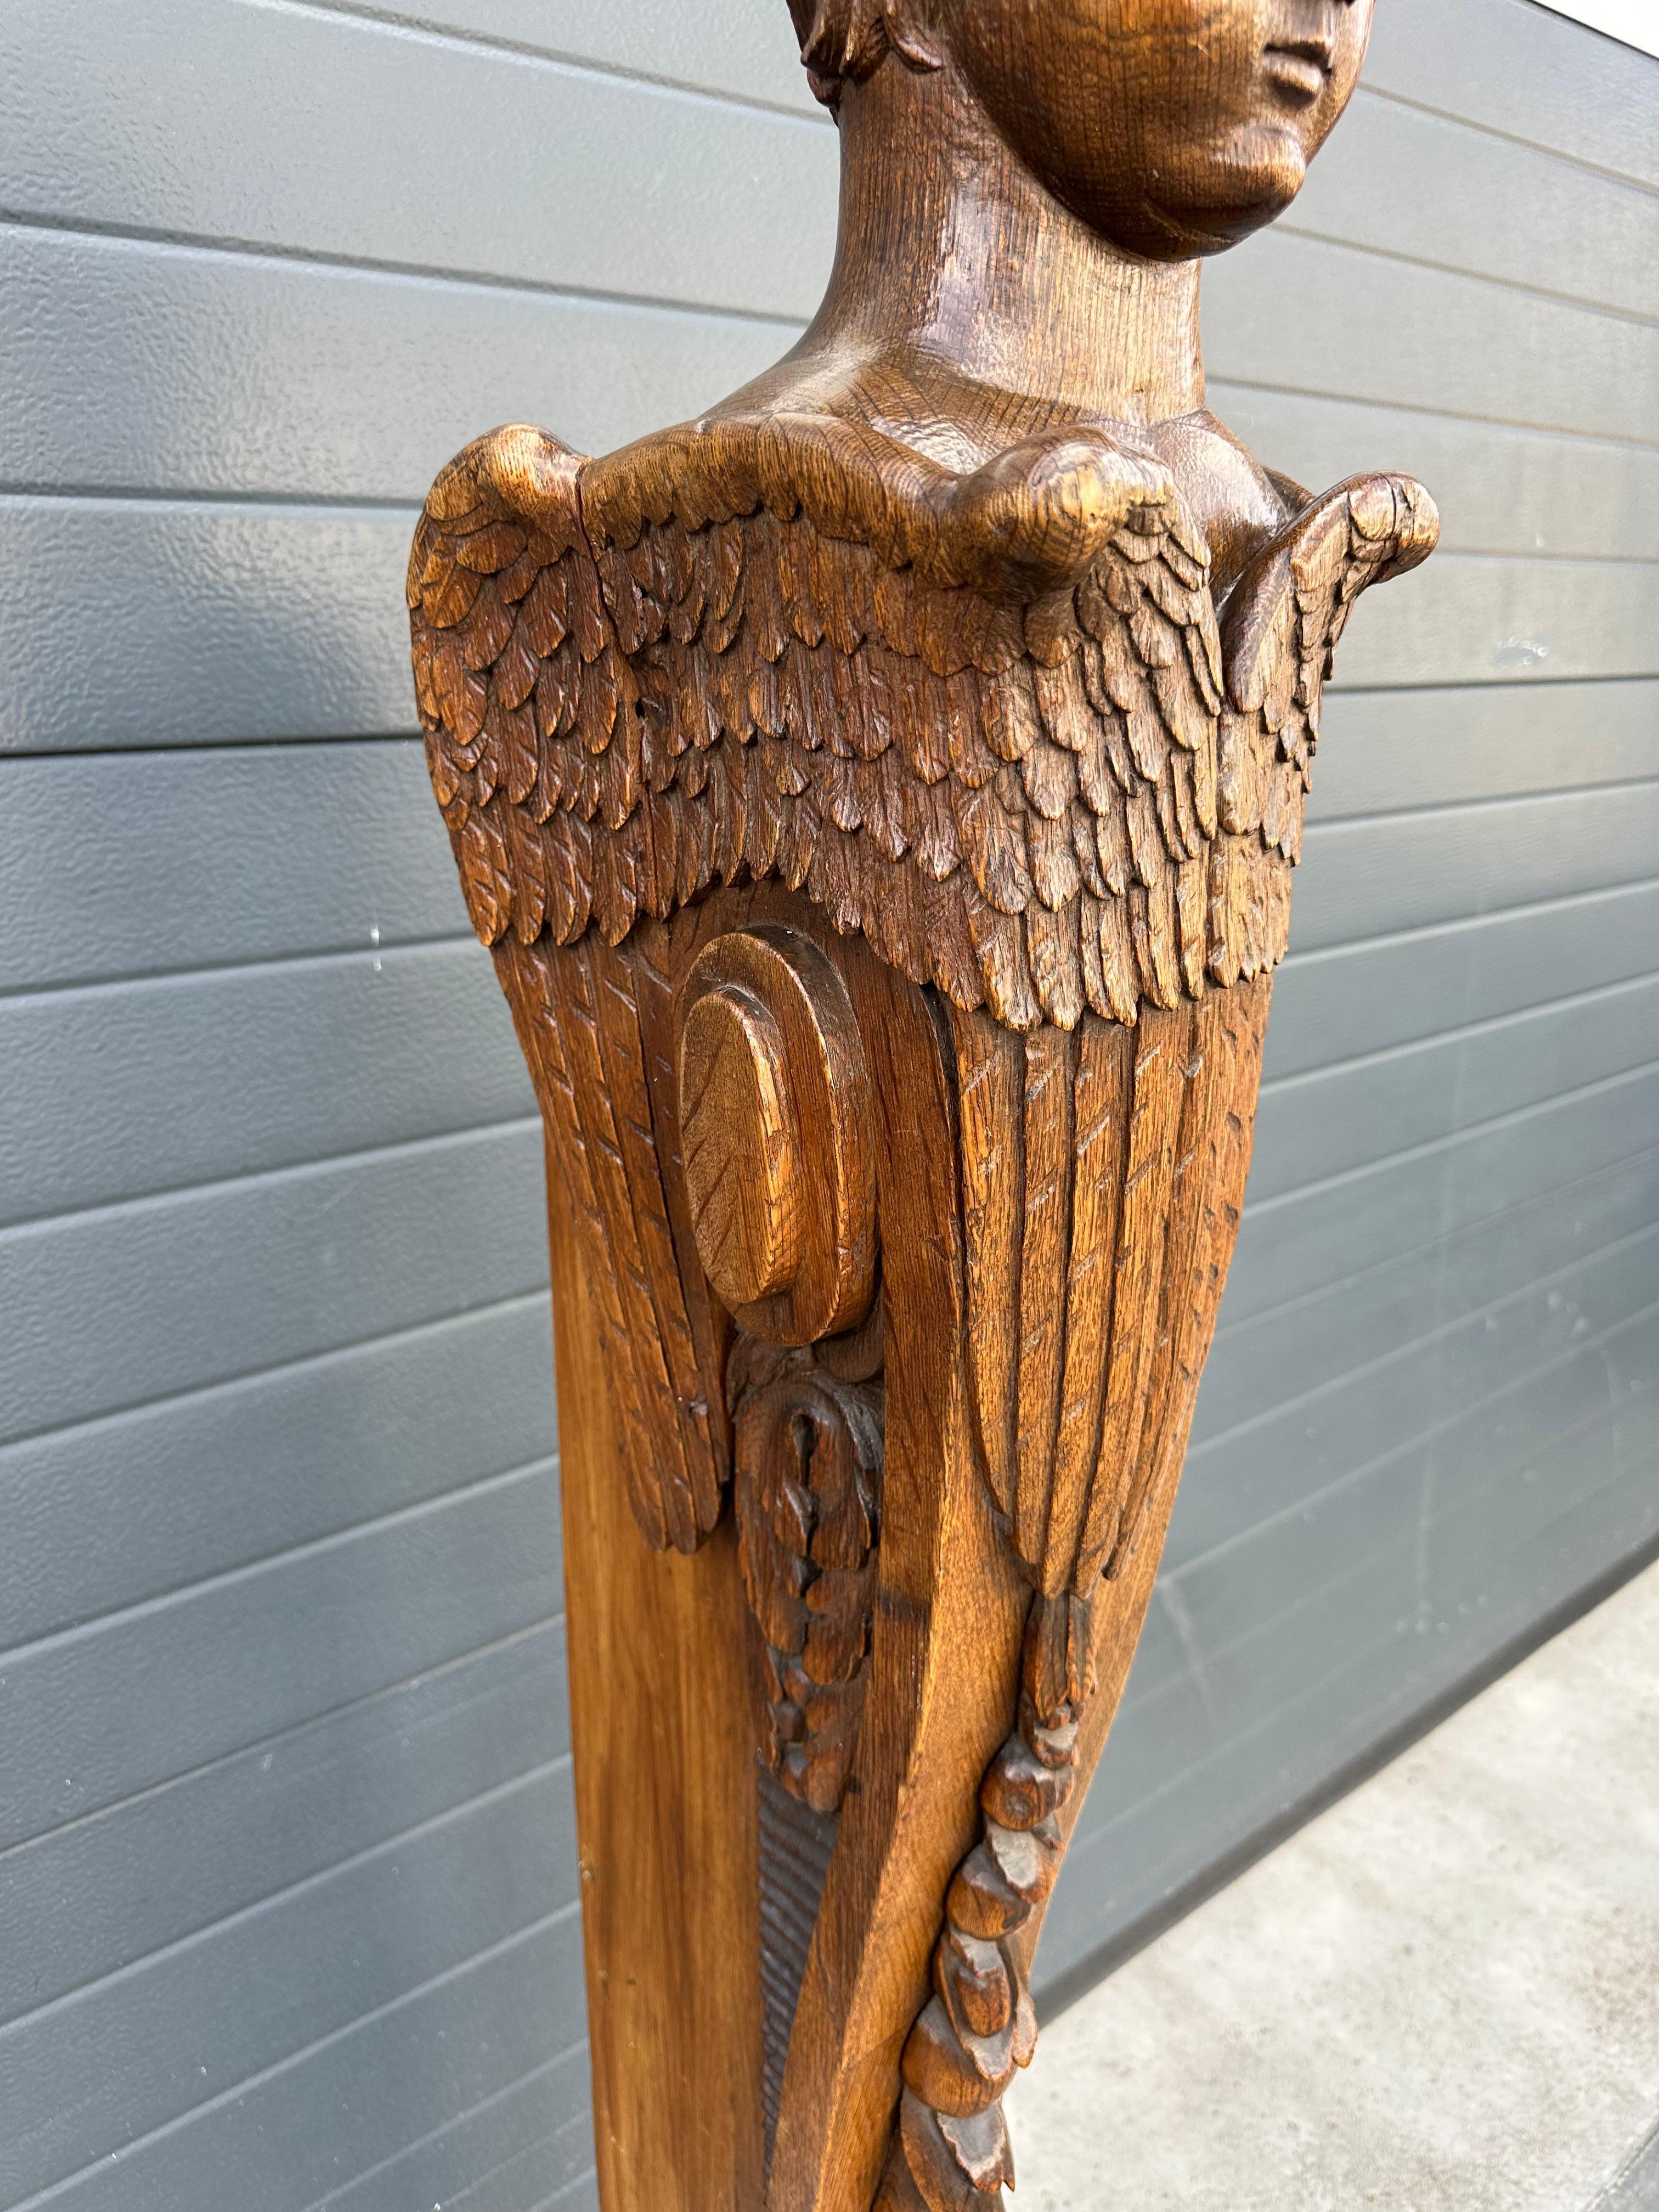 19th Century Antique Gothic Revival Carved Oak Stair Rail Newel Post w Angel Sculpture 19thC. For Sale